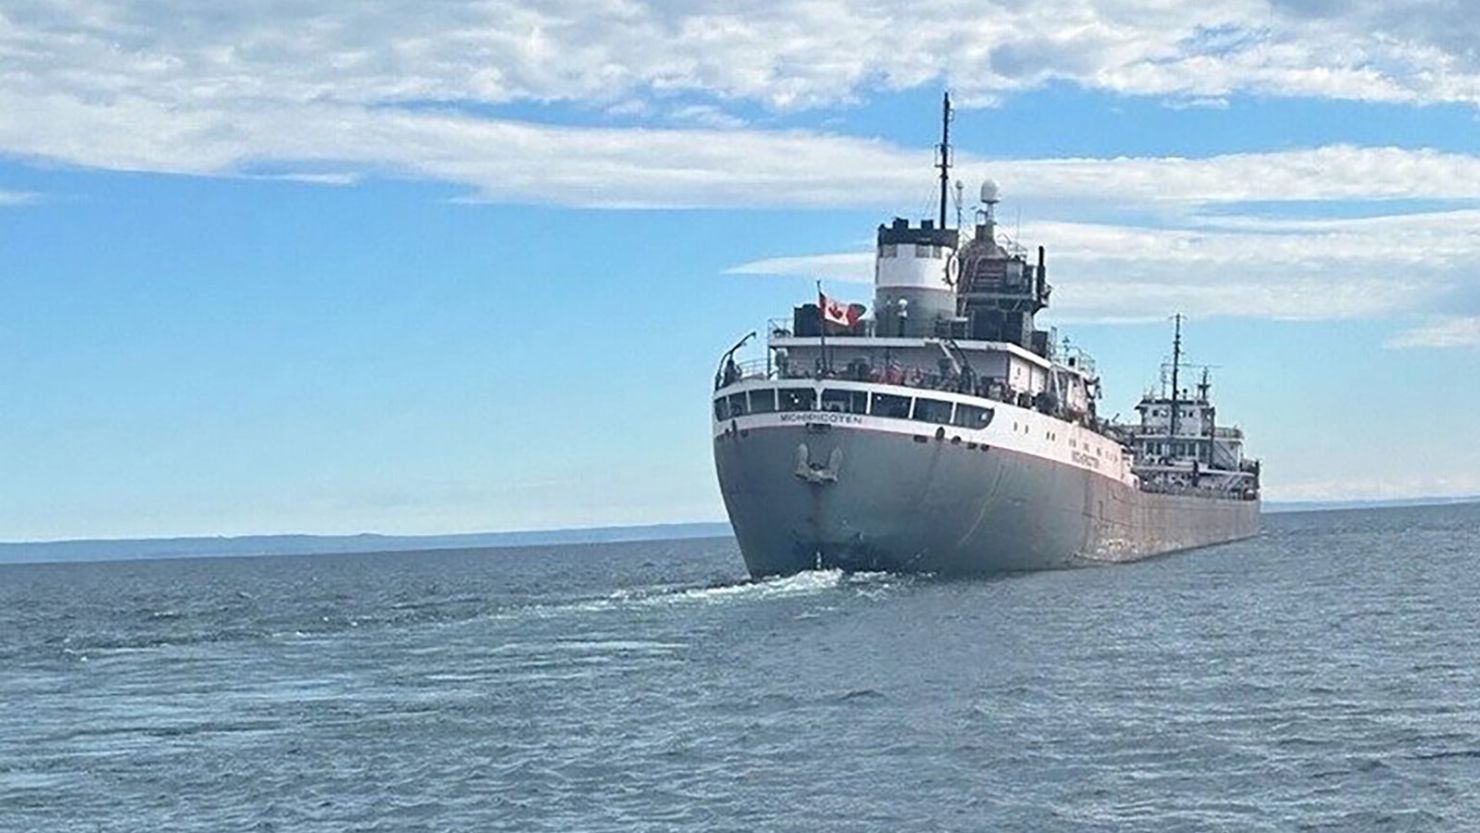 US Coast Guard investigation underway after ship collides with underwater  object, takes on water in Lake Superior